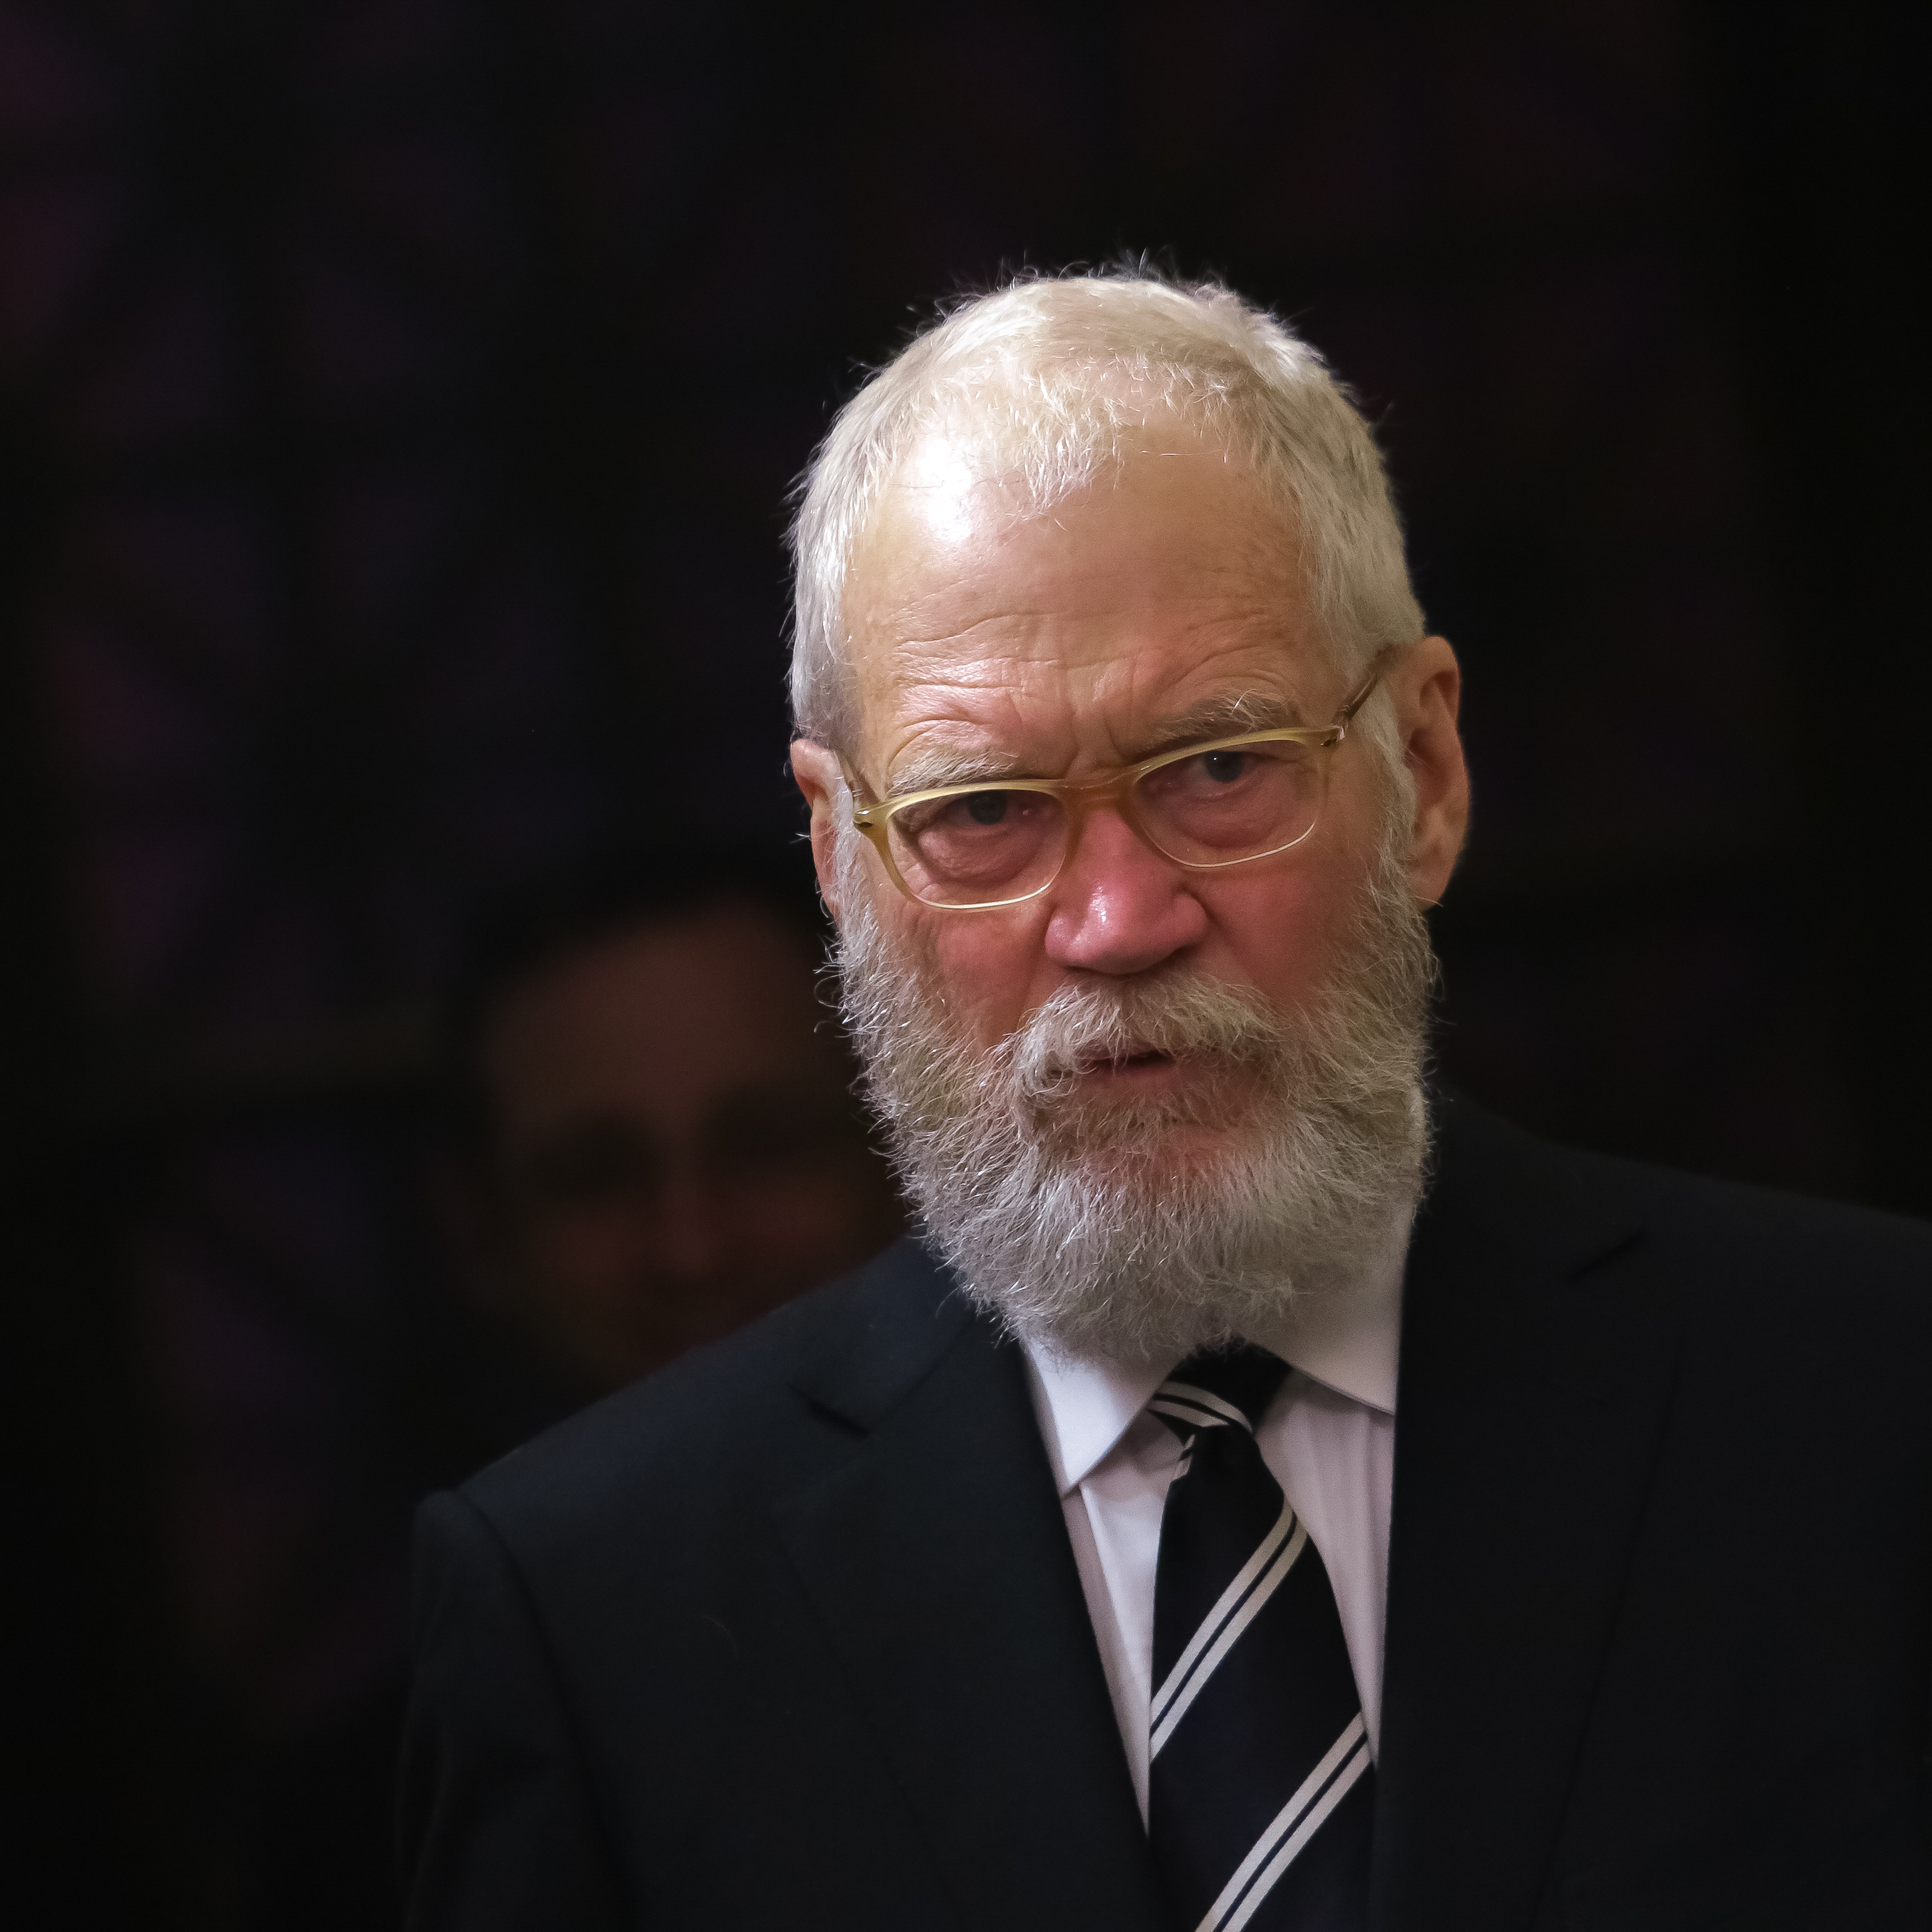 Individual Award Recipient, comedian/television host David Letterman is seen entering the press room during the 75th Annual Peabody Awards Ceremony held at Cipriani Wall Street on May 21, 2016 in New York City. Brent N. Clarke&mdash;FilmMagic (Brent N. Clarke&mdash;FilmMagic)